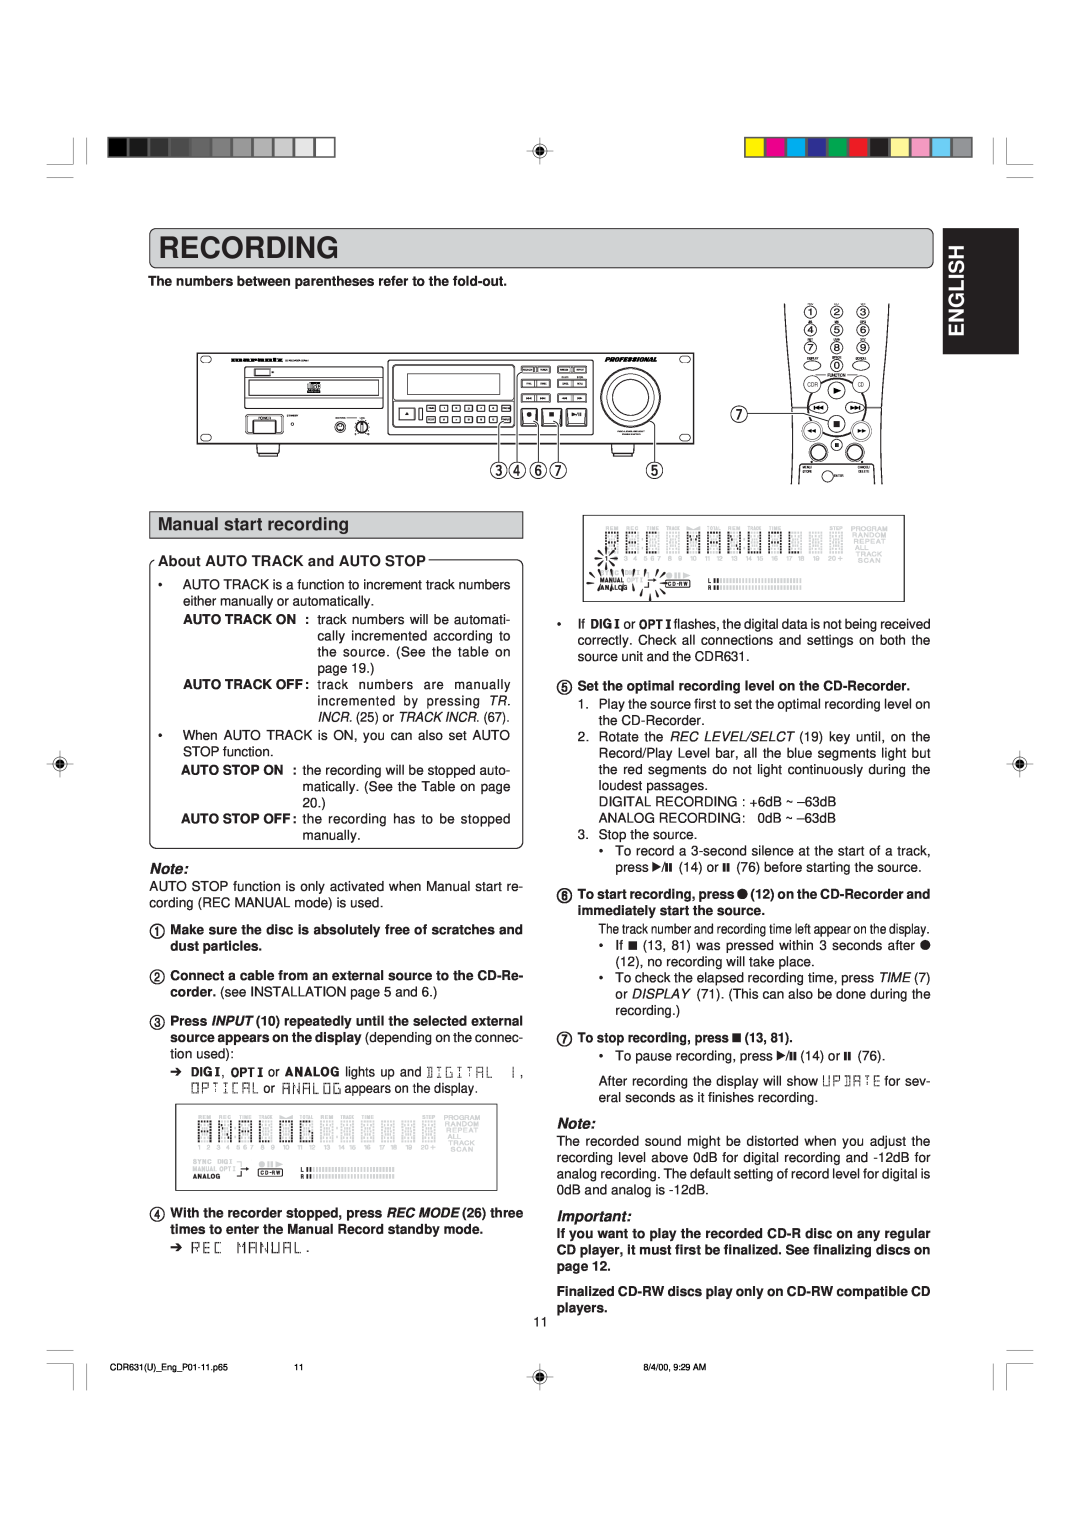 Marantz CDR631 manual eryu, Recording, English, Manual start recording, About AUTO TRACK and AUTO STOP 